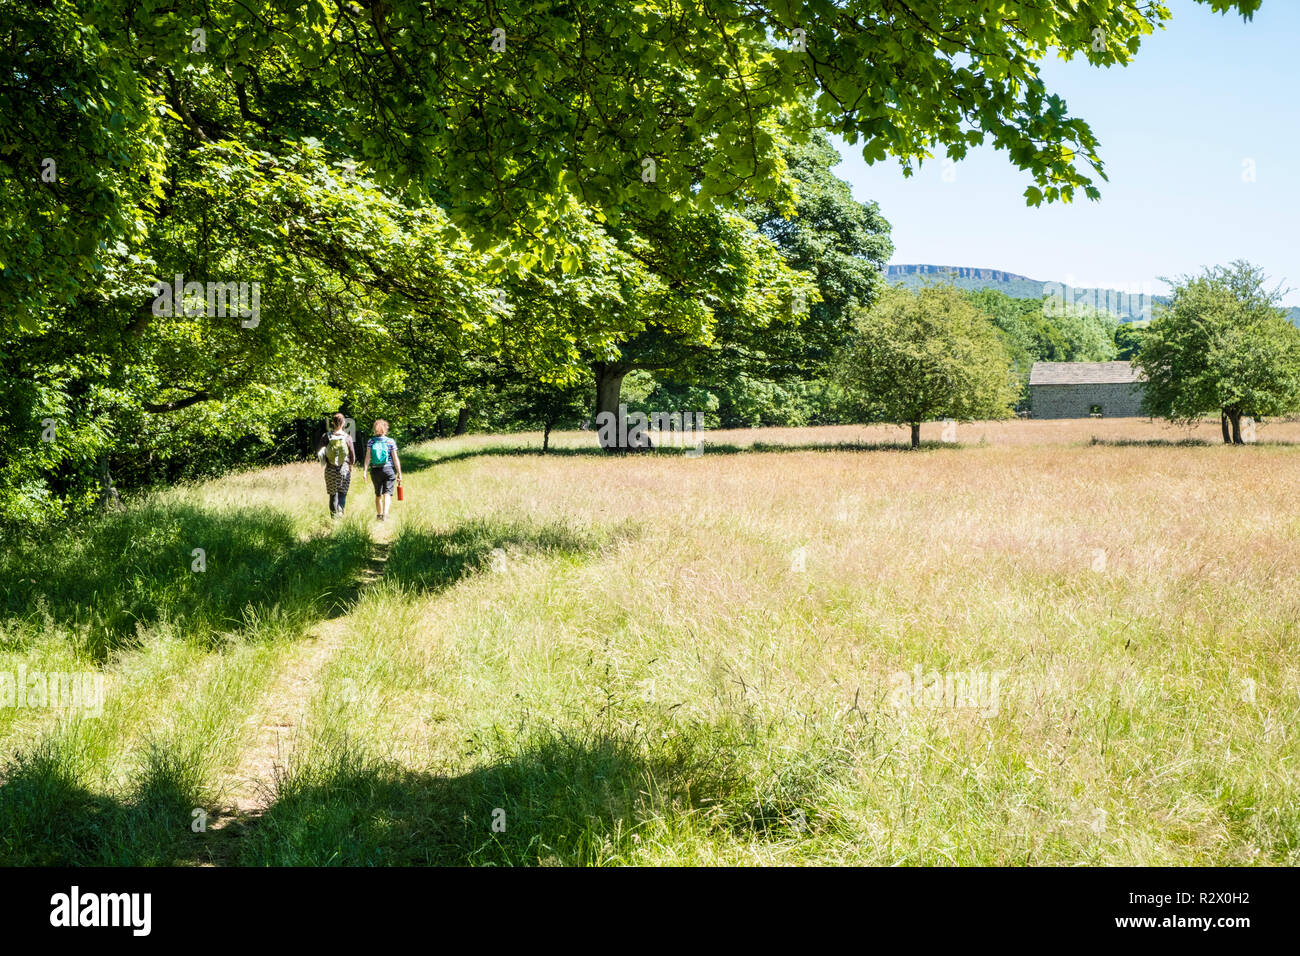 Walkers in the British countryside. Two women walking through a field during Summer, Derbyshire, England, UK Stock Photo